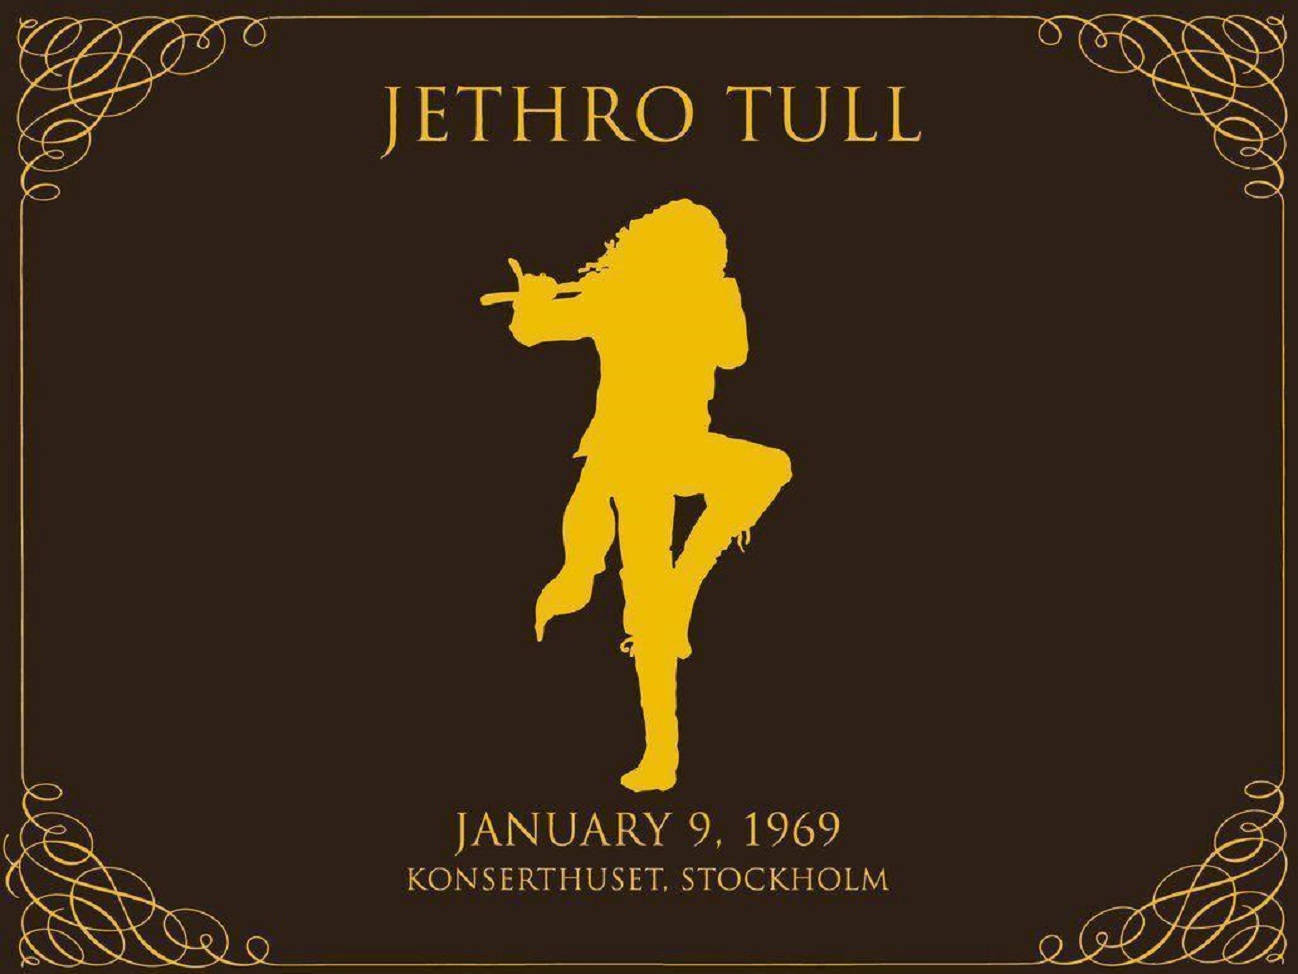 Jethro Tull Rocking On Stage - Vintage Yellow Concert Poster Wallpaper